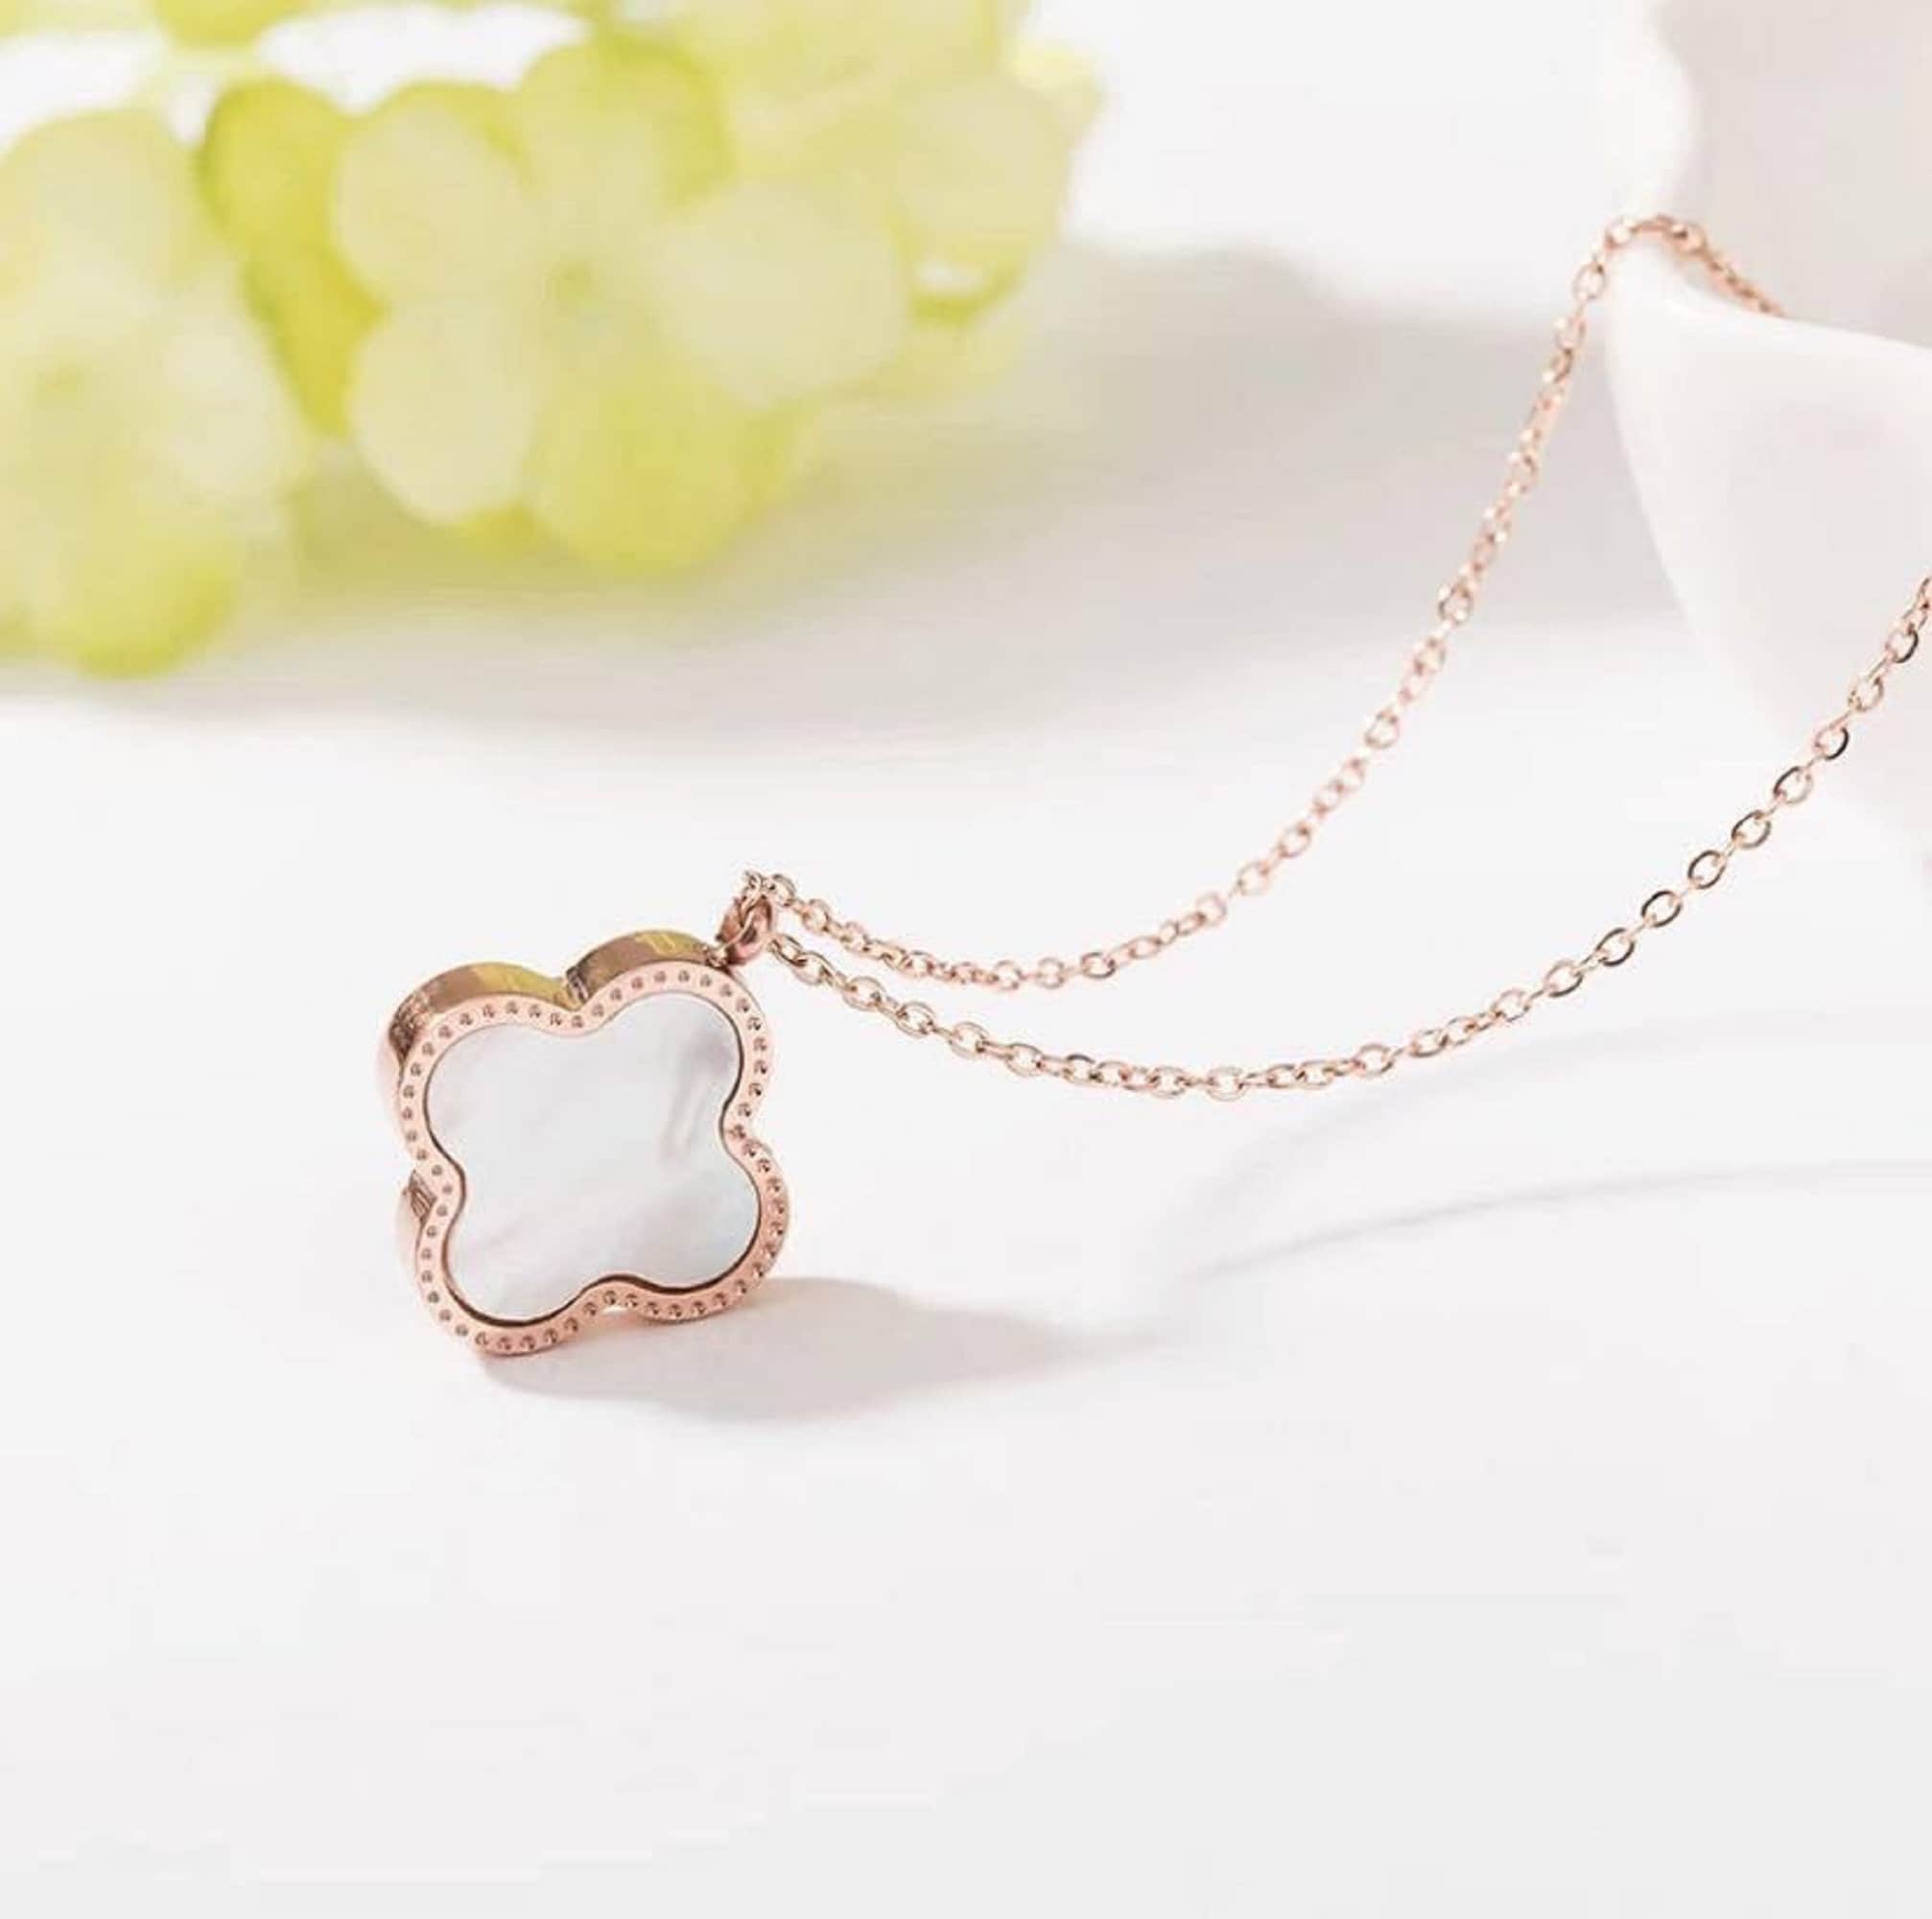 Let the Monogram Idylle jewelery collection (and a lucky four-leaf